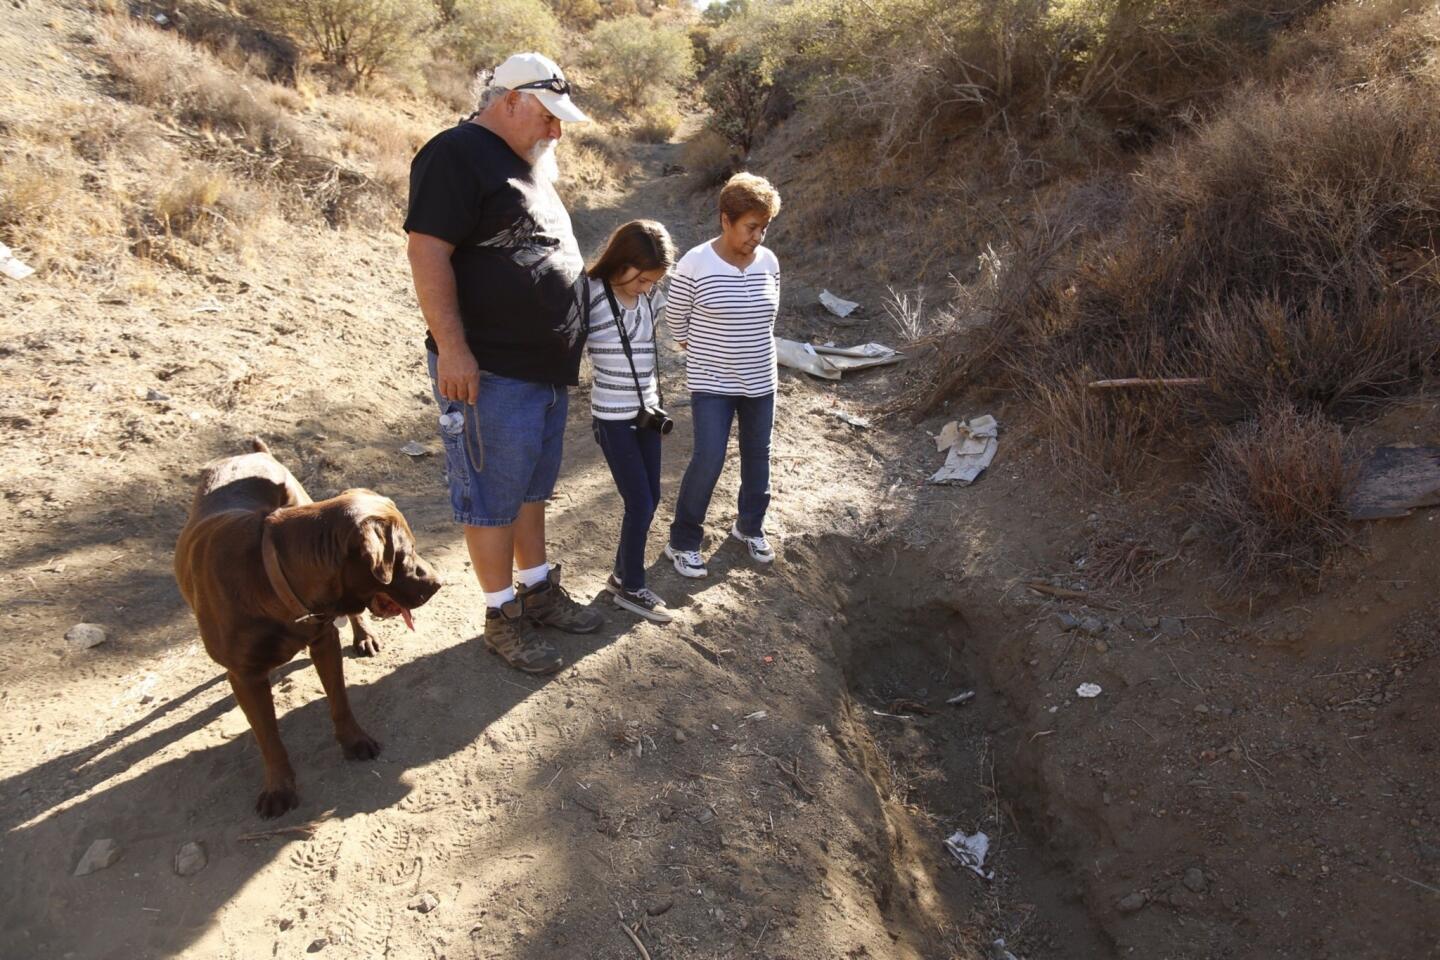 Rocky Ramos, 60, walks with his wife, Isabel, and granddaughter Sophia Salazar, 9, and their dog Buddy at the Palmdale site of the shallow grave where Buddy sniffed out a human skull that turned out to belong to missing Fox executive Gavin Smith.